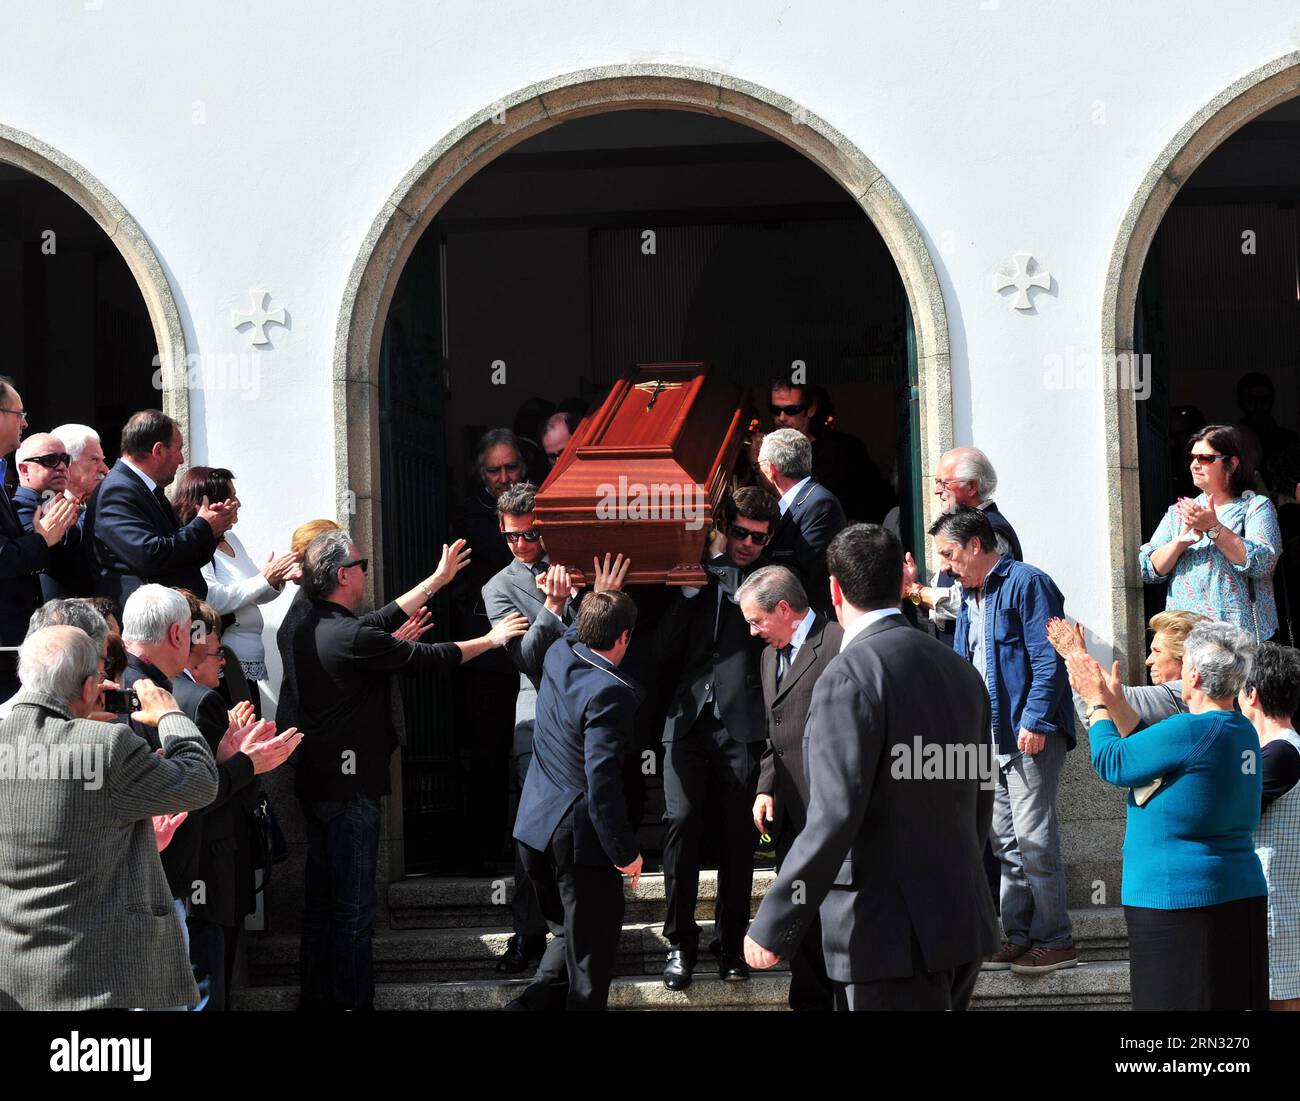 Pallbearers carry the coffin of Portuguese filmmaker Manoel de Oliveira during a funeral in Porto, Portugal, on April 3, 2015. Portuguese filmmaker Manoel de Oliveira died on Thursday aged 106. The filmmaker made over 50 films in his career which began in 1931. ) (zcc) PORTUGAL-PORTO-FUNERAL-OLIVEIRA ZhangxLiyun PUBLICATIONxNOTxINxCHN   Pallbearers Carry The Coffin of PORTUGUESE Filmmaker Manoel de Oliveira during a Funeral in Porto Portugal ON April 3 2015 PORTUGUESE Filmmaker Manoel de Oliveira died ON Thursday Aged 106 The Filmmaker Made Over 50 Films in His Career Which began in 1931 ZCC P Stock Photo